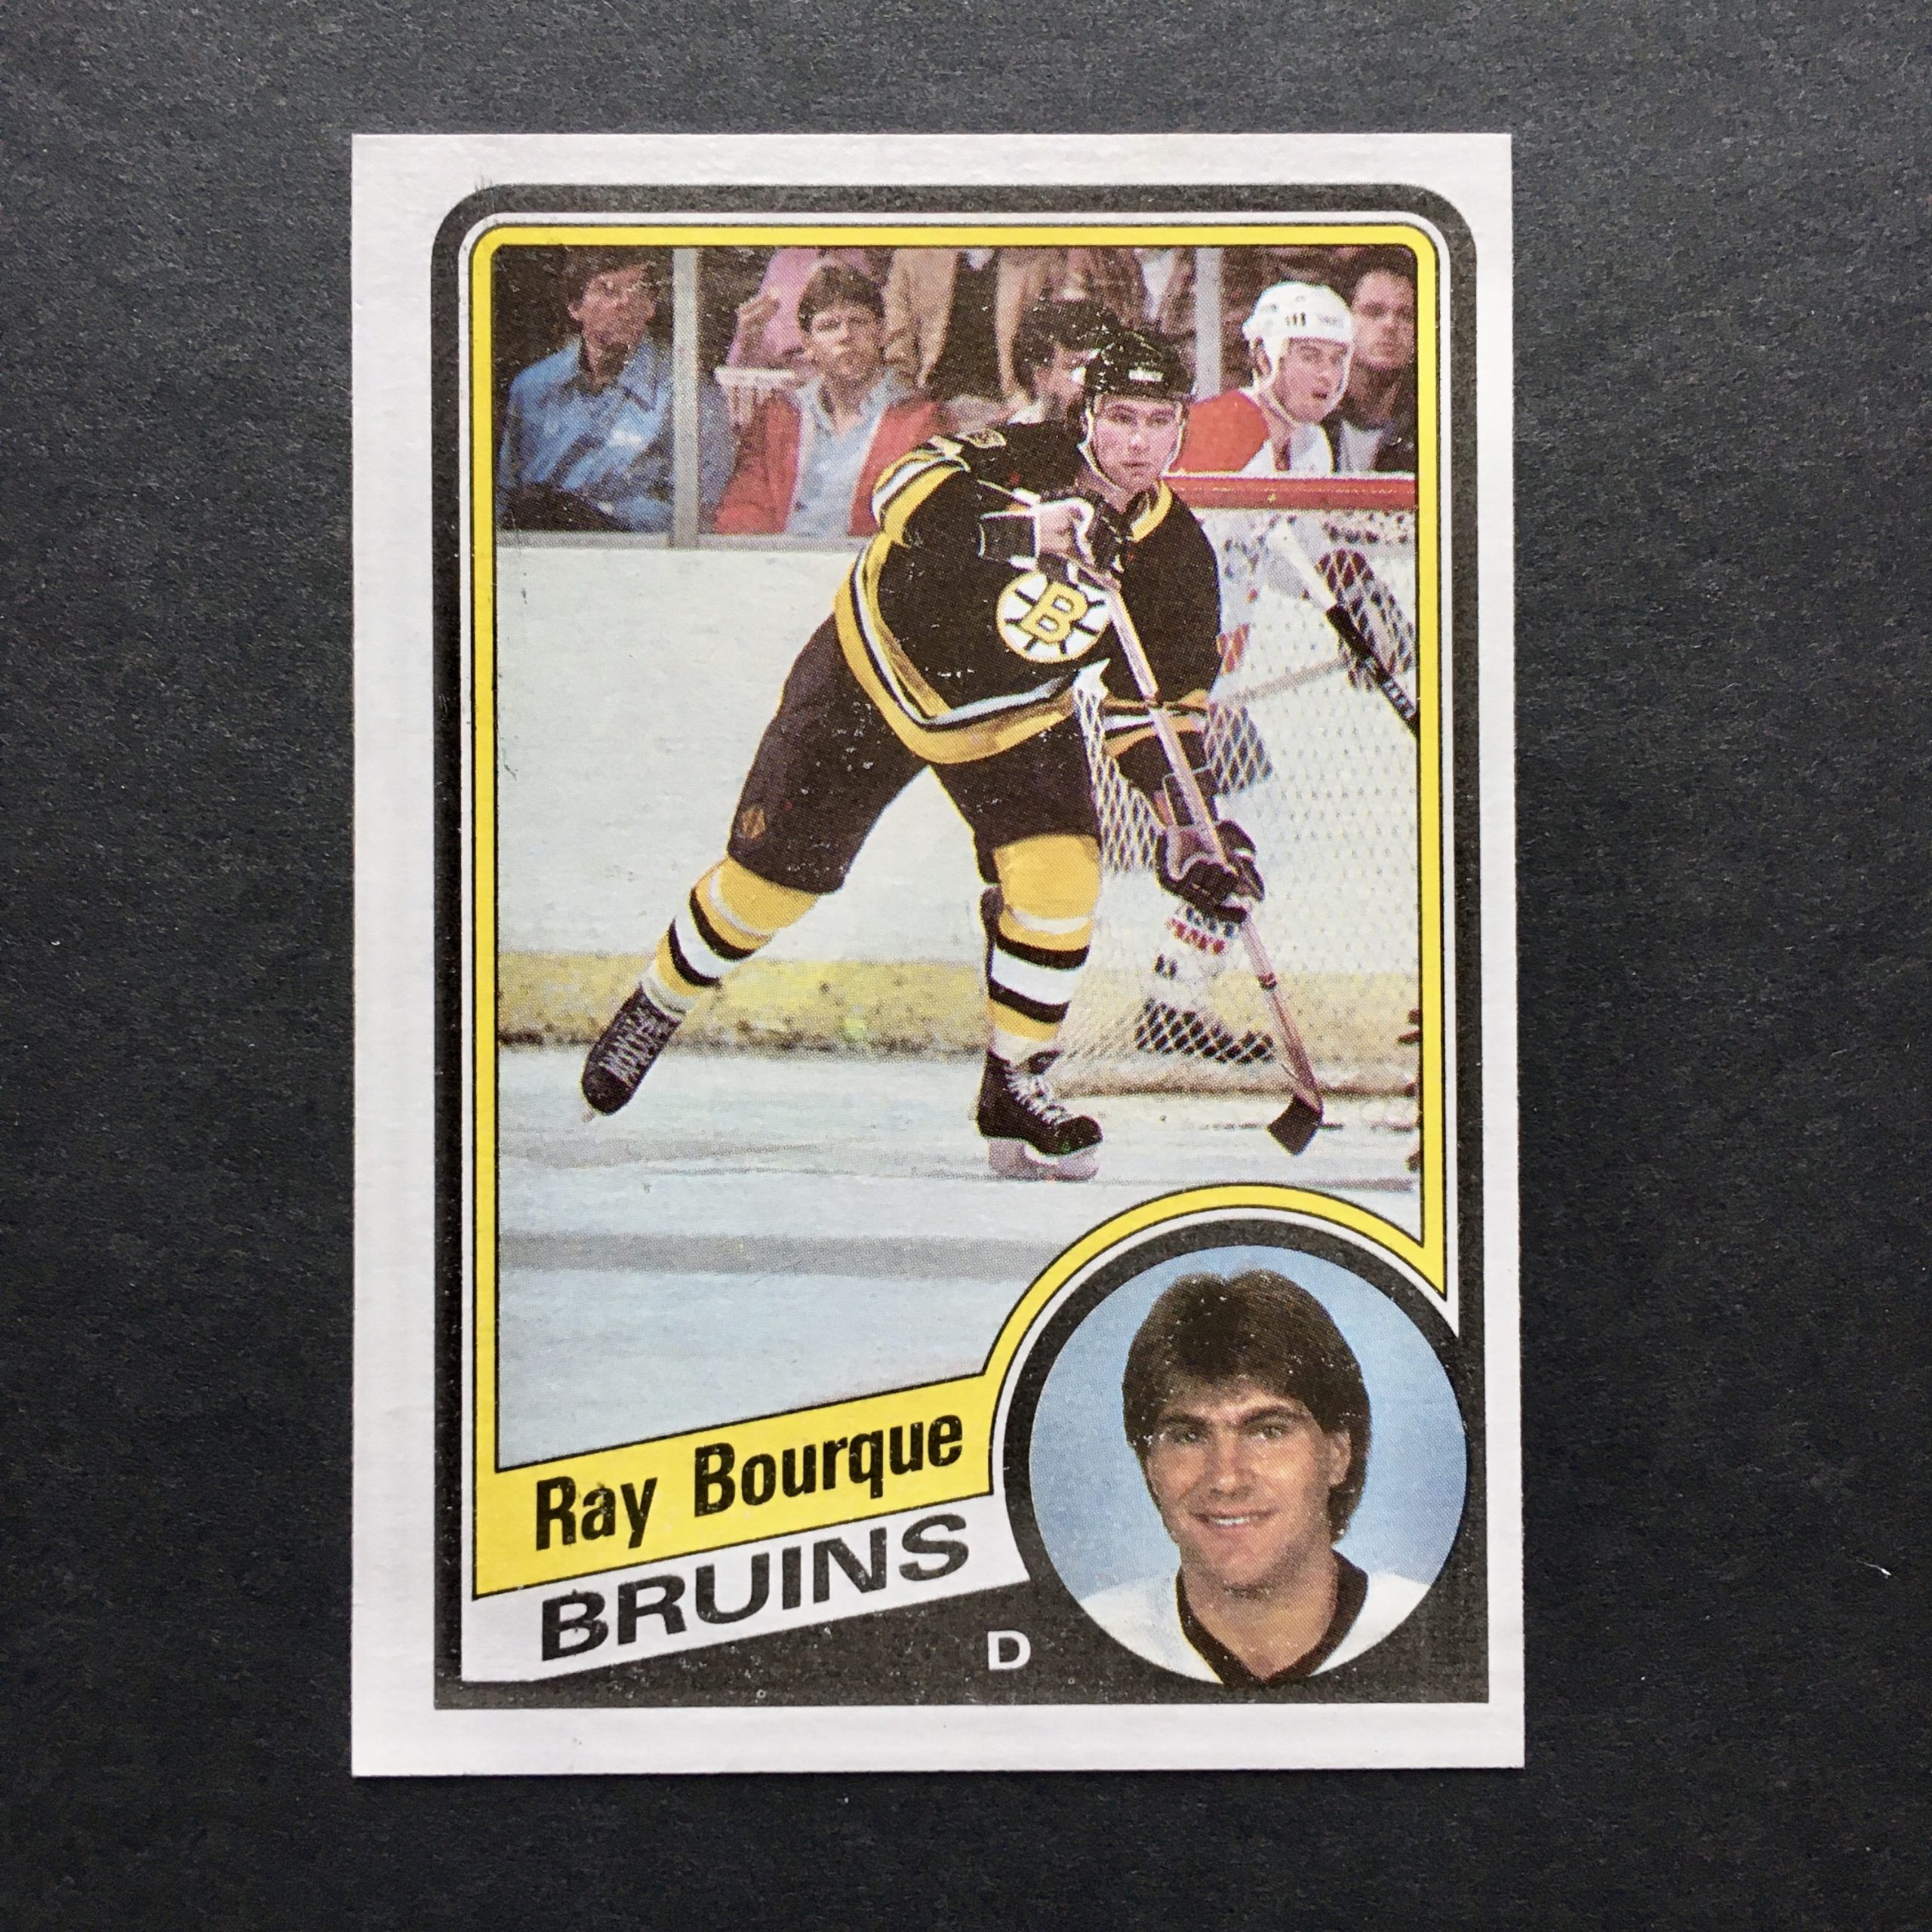 Ray Bourque 1984-85 Topps Card